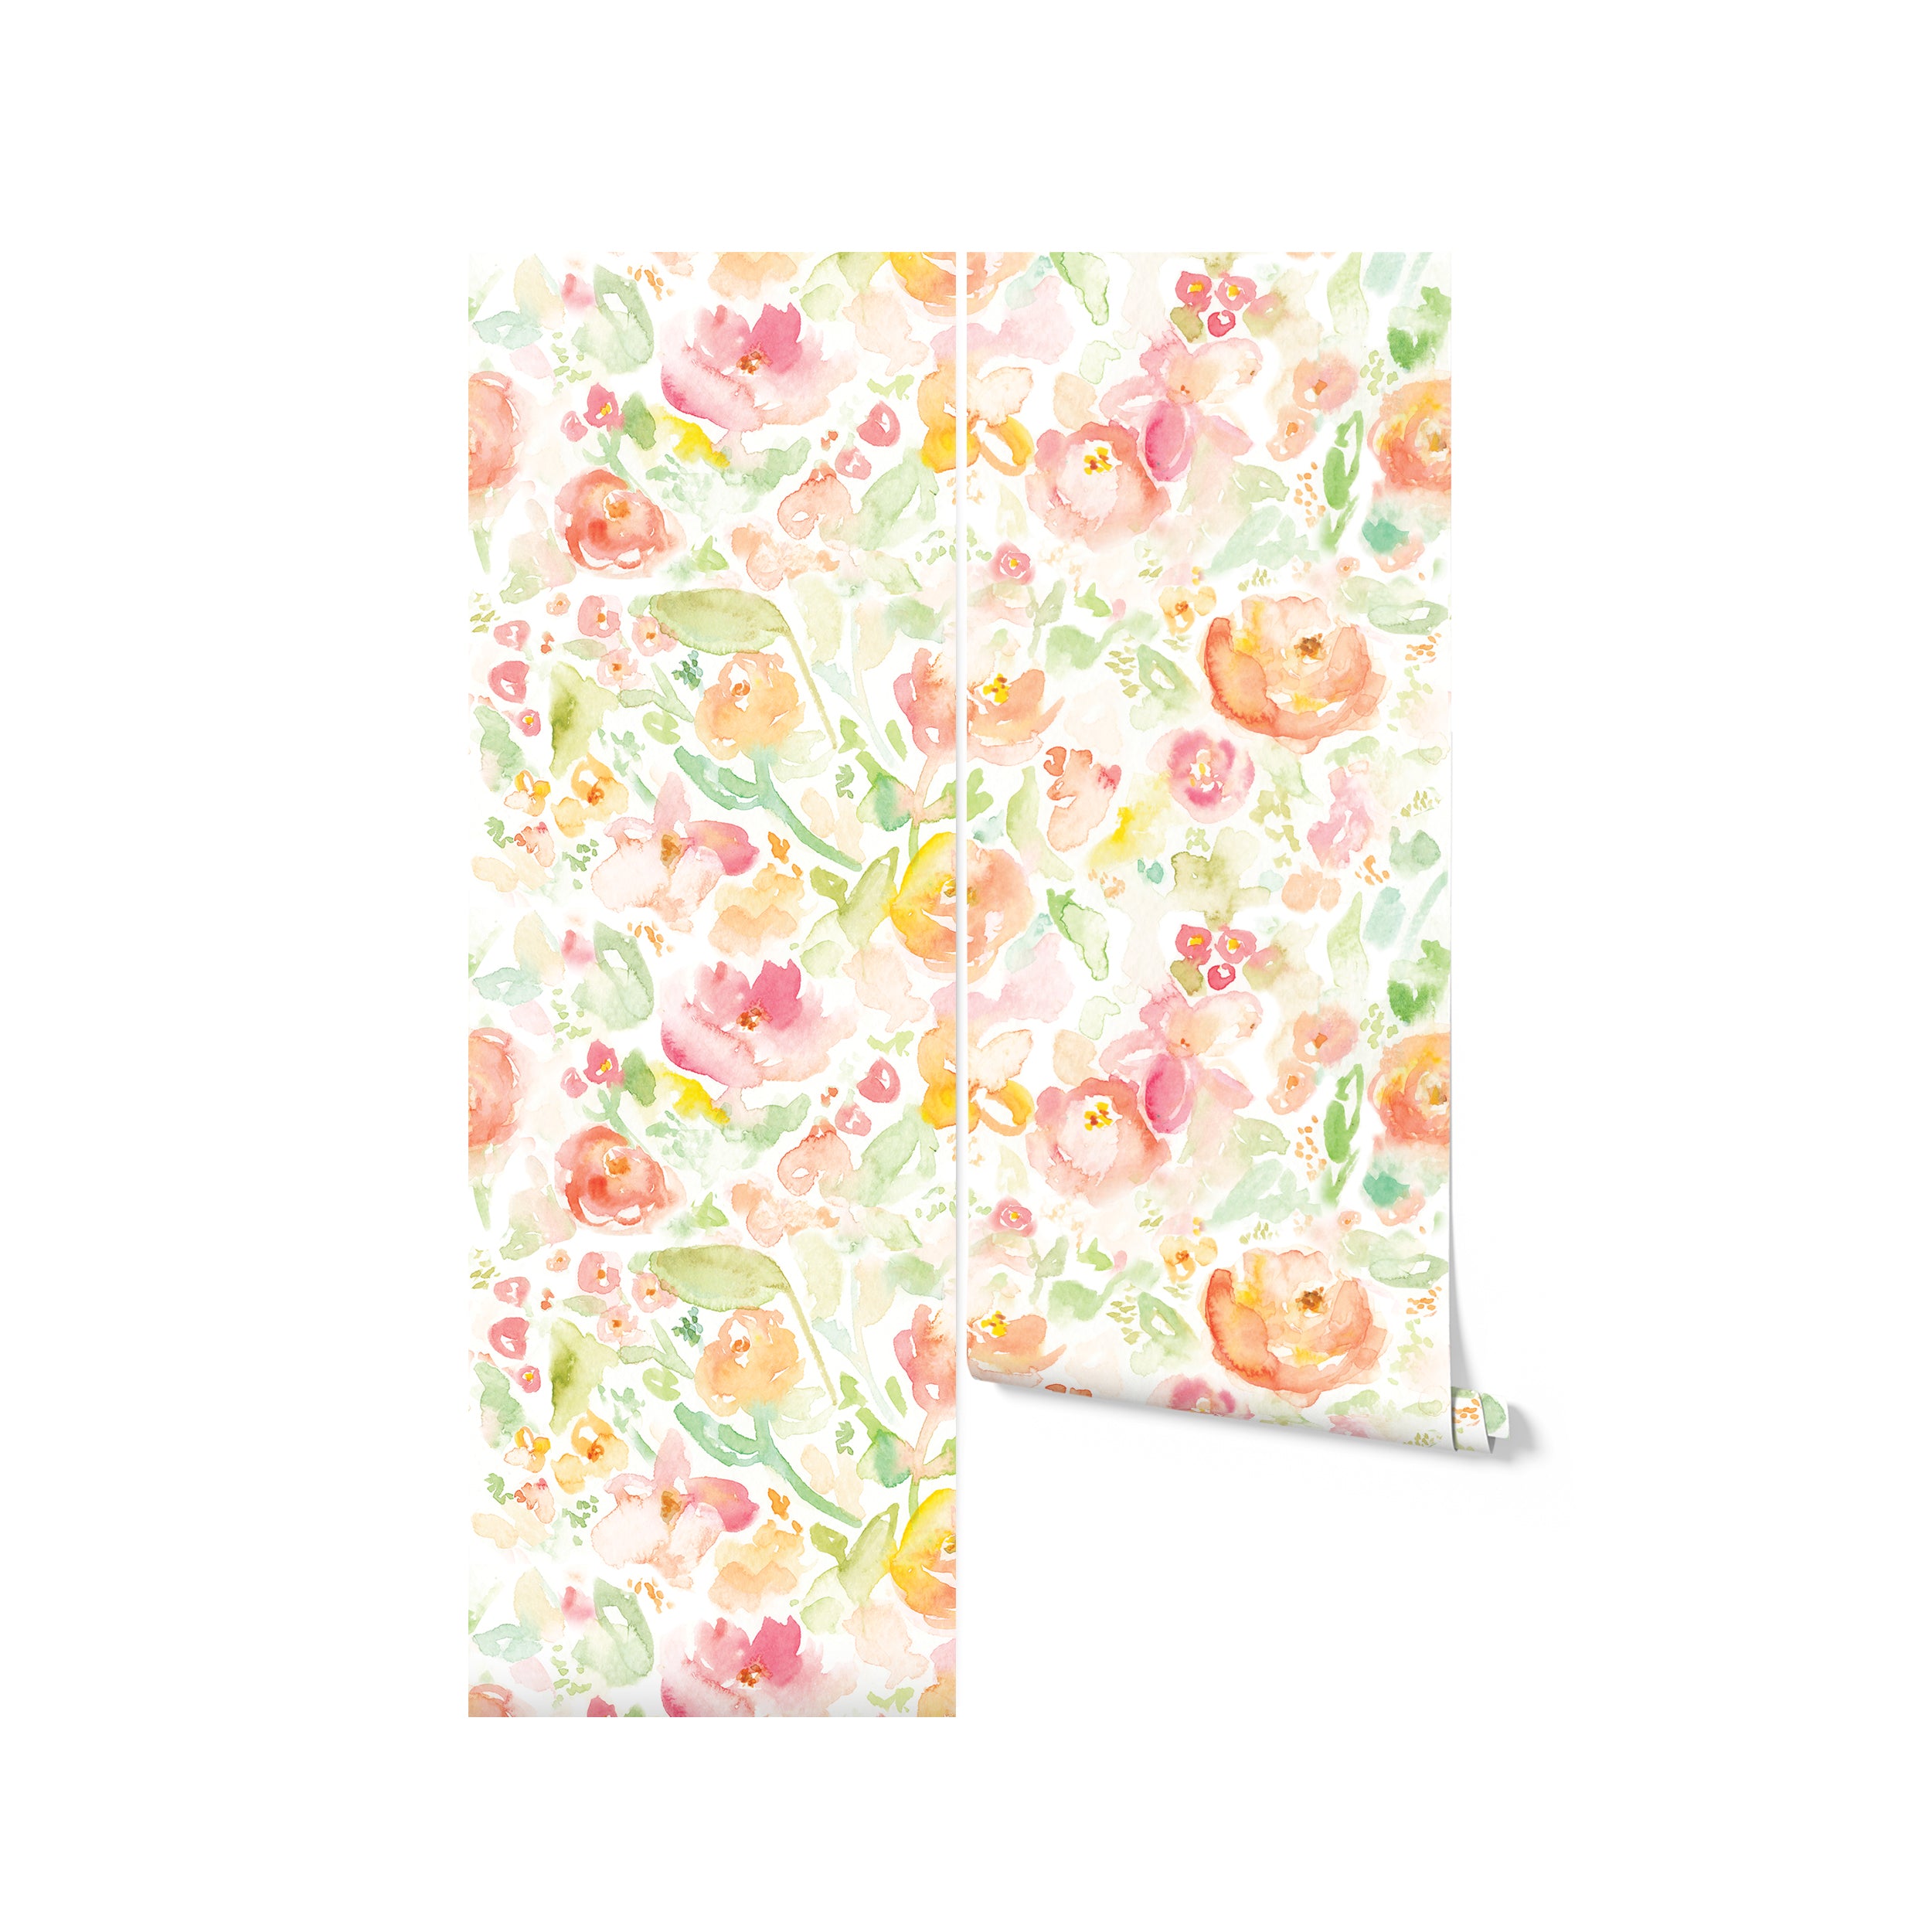 A roll of Bright and Colorful Floral Wallpaper, partially unrolled to reveal its detailed and vibrant design of assorted flowers and foliage. The wallpaper features a dense pattern of blossoms in soft watercolor tones, perfect for adding a burst of color and natural beauty to any interior space